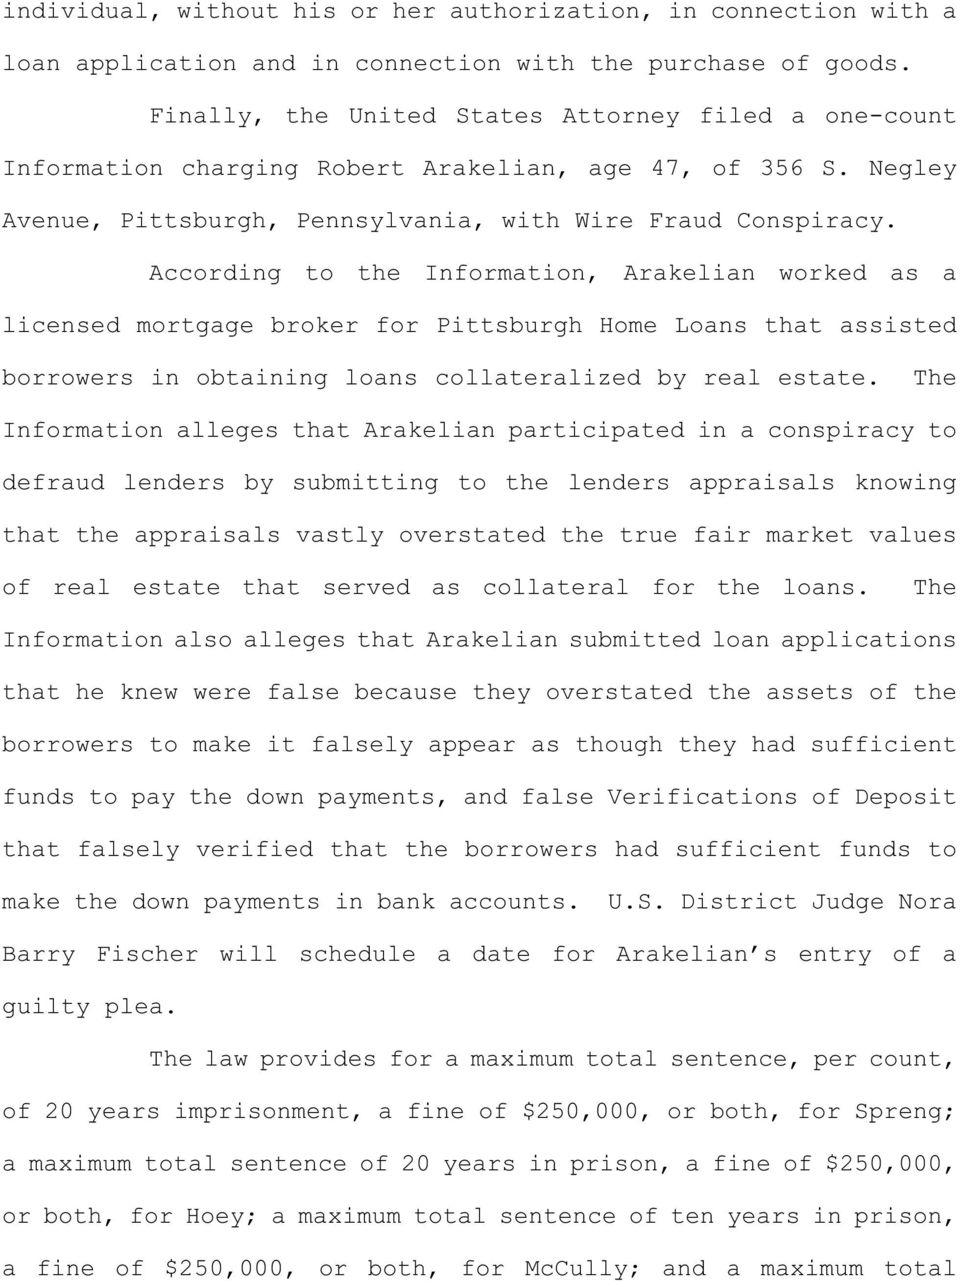 According to the Information, Arakelian worked as a licensed mortgage broker for Pittsburgh Home Loans that assisted borrowers in obtaining loans collateralized by real estate.